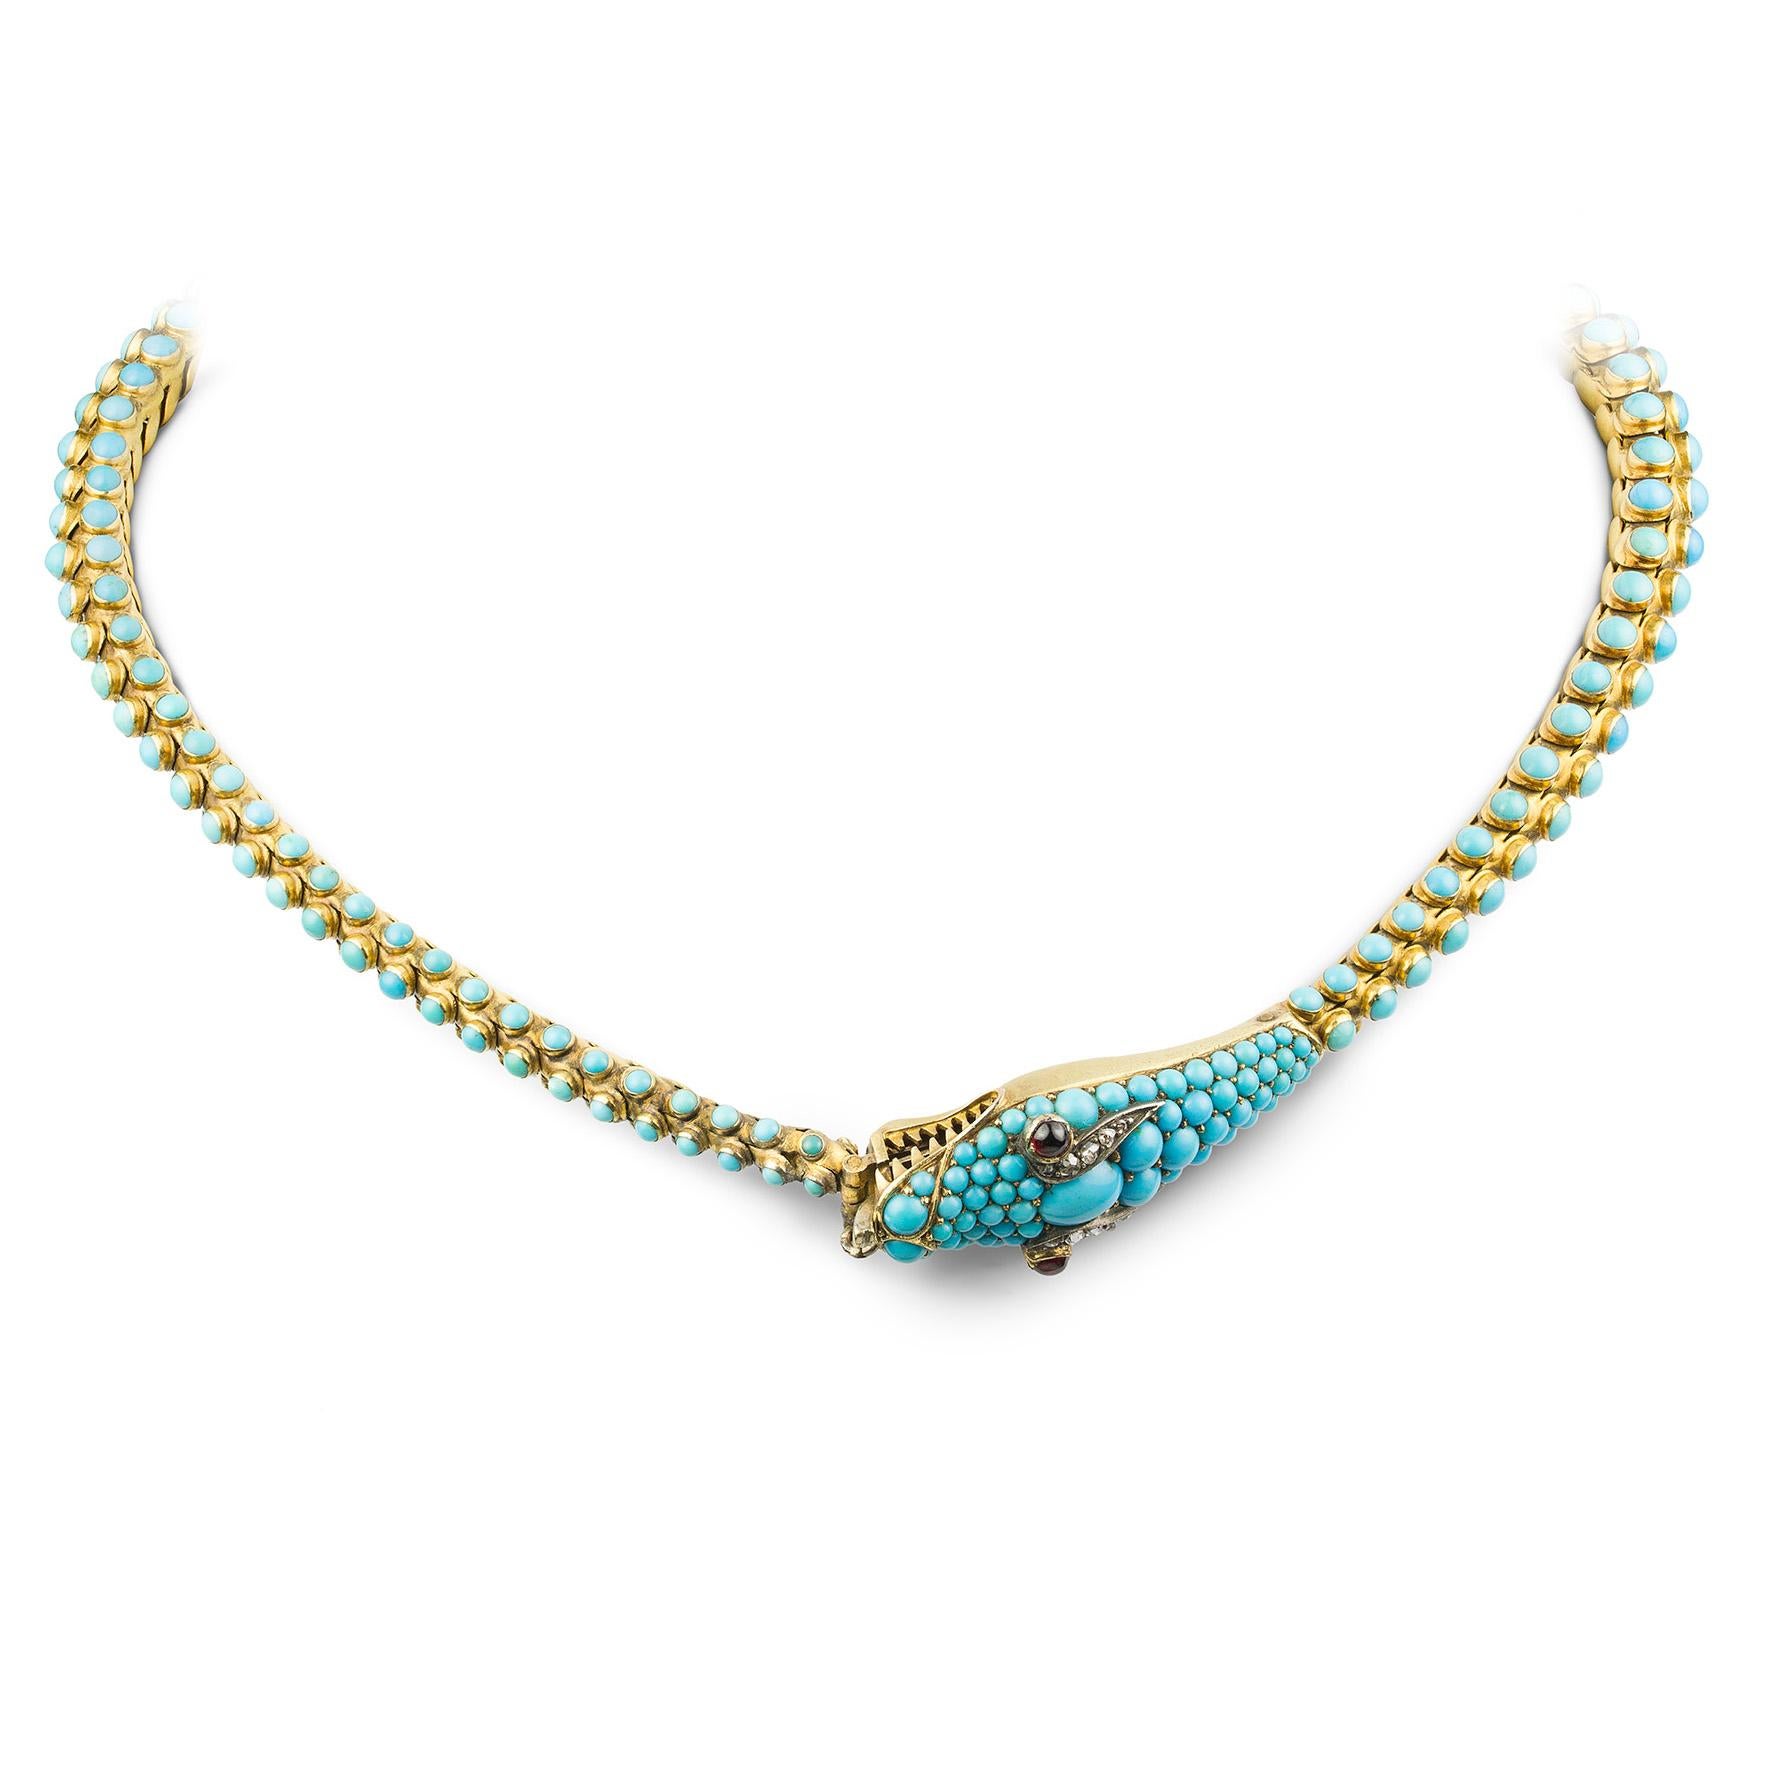 A fine Victorian turquoise serpent necklace, the flexible tapering yellow gold body formed of three rows of scale-like collet-set turquoise cabochons, the head decorated with rose-cut diamond brows, garnet eyes and yellow gold teeth, approximate